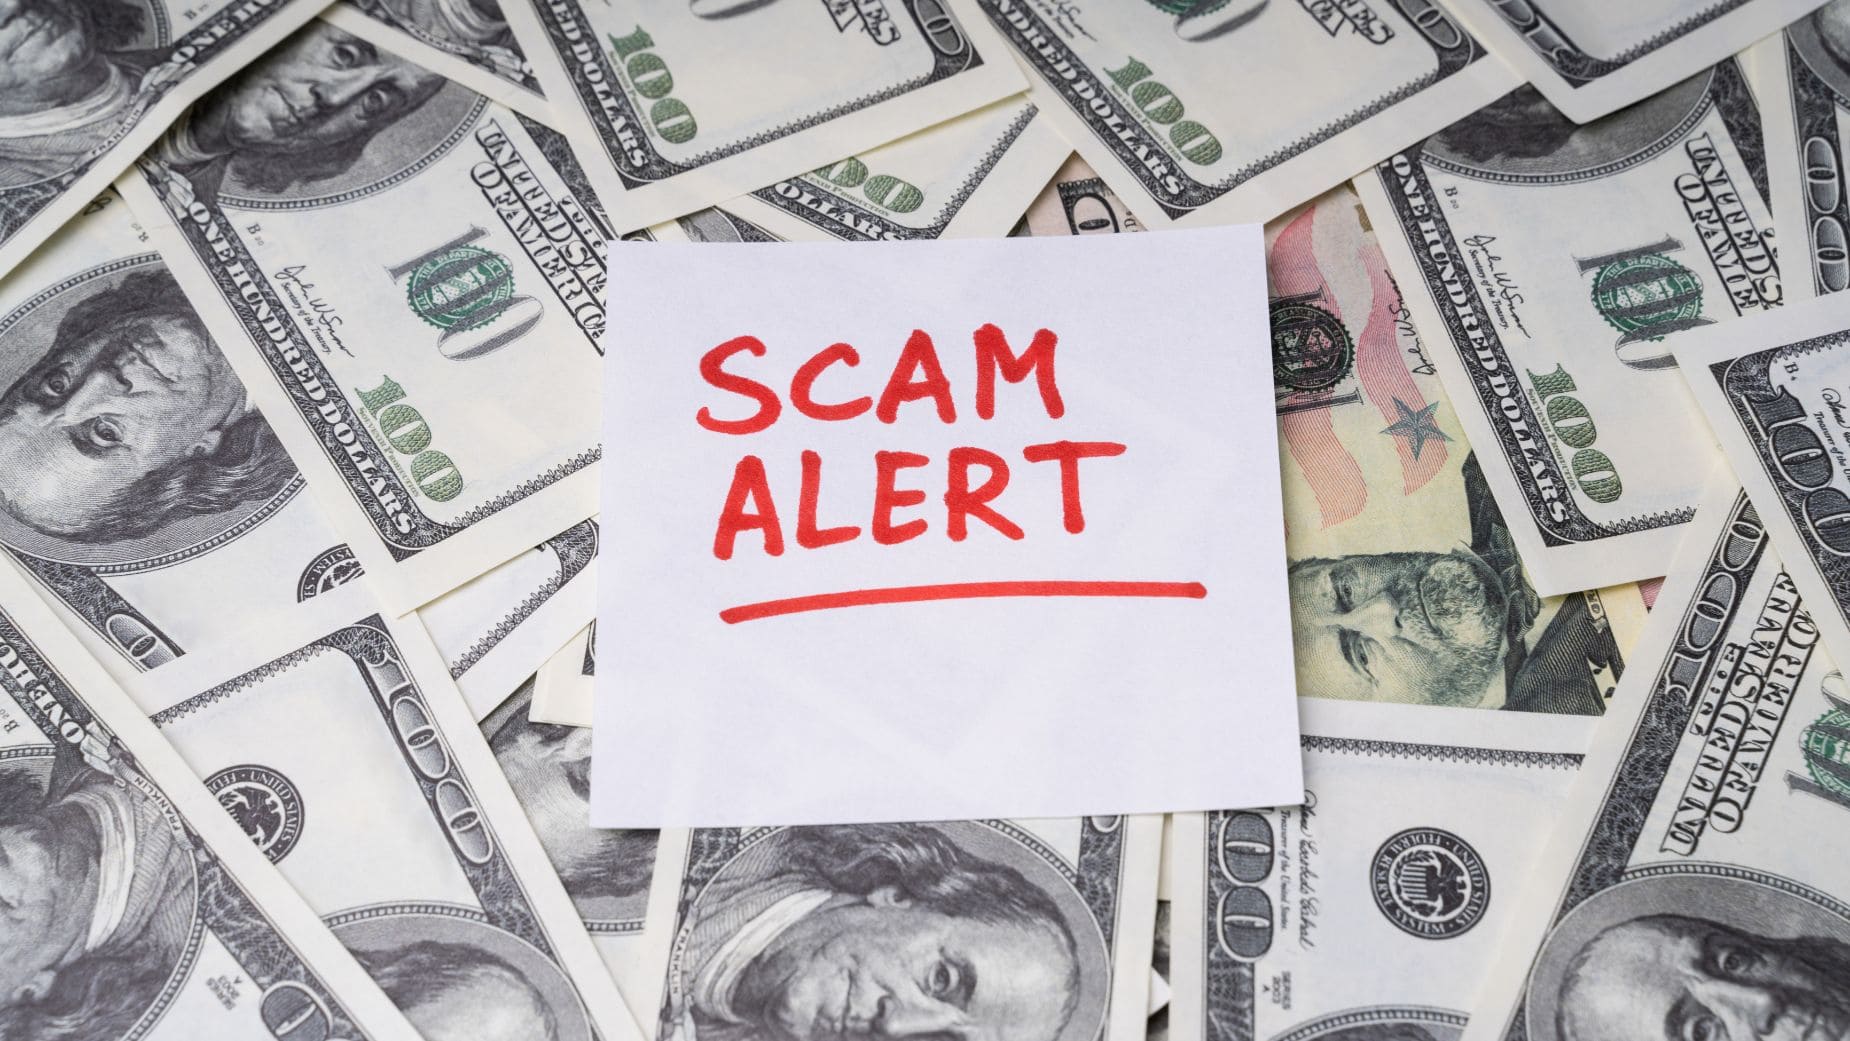 IRS warns about scams